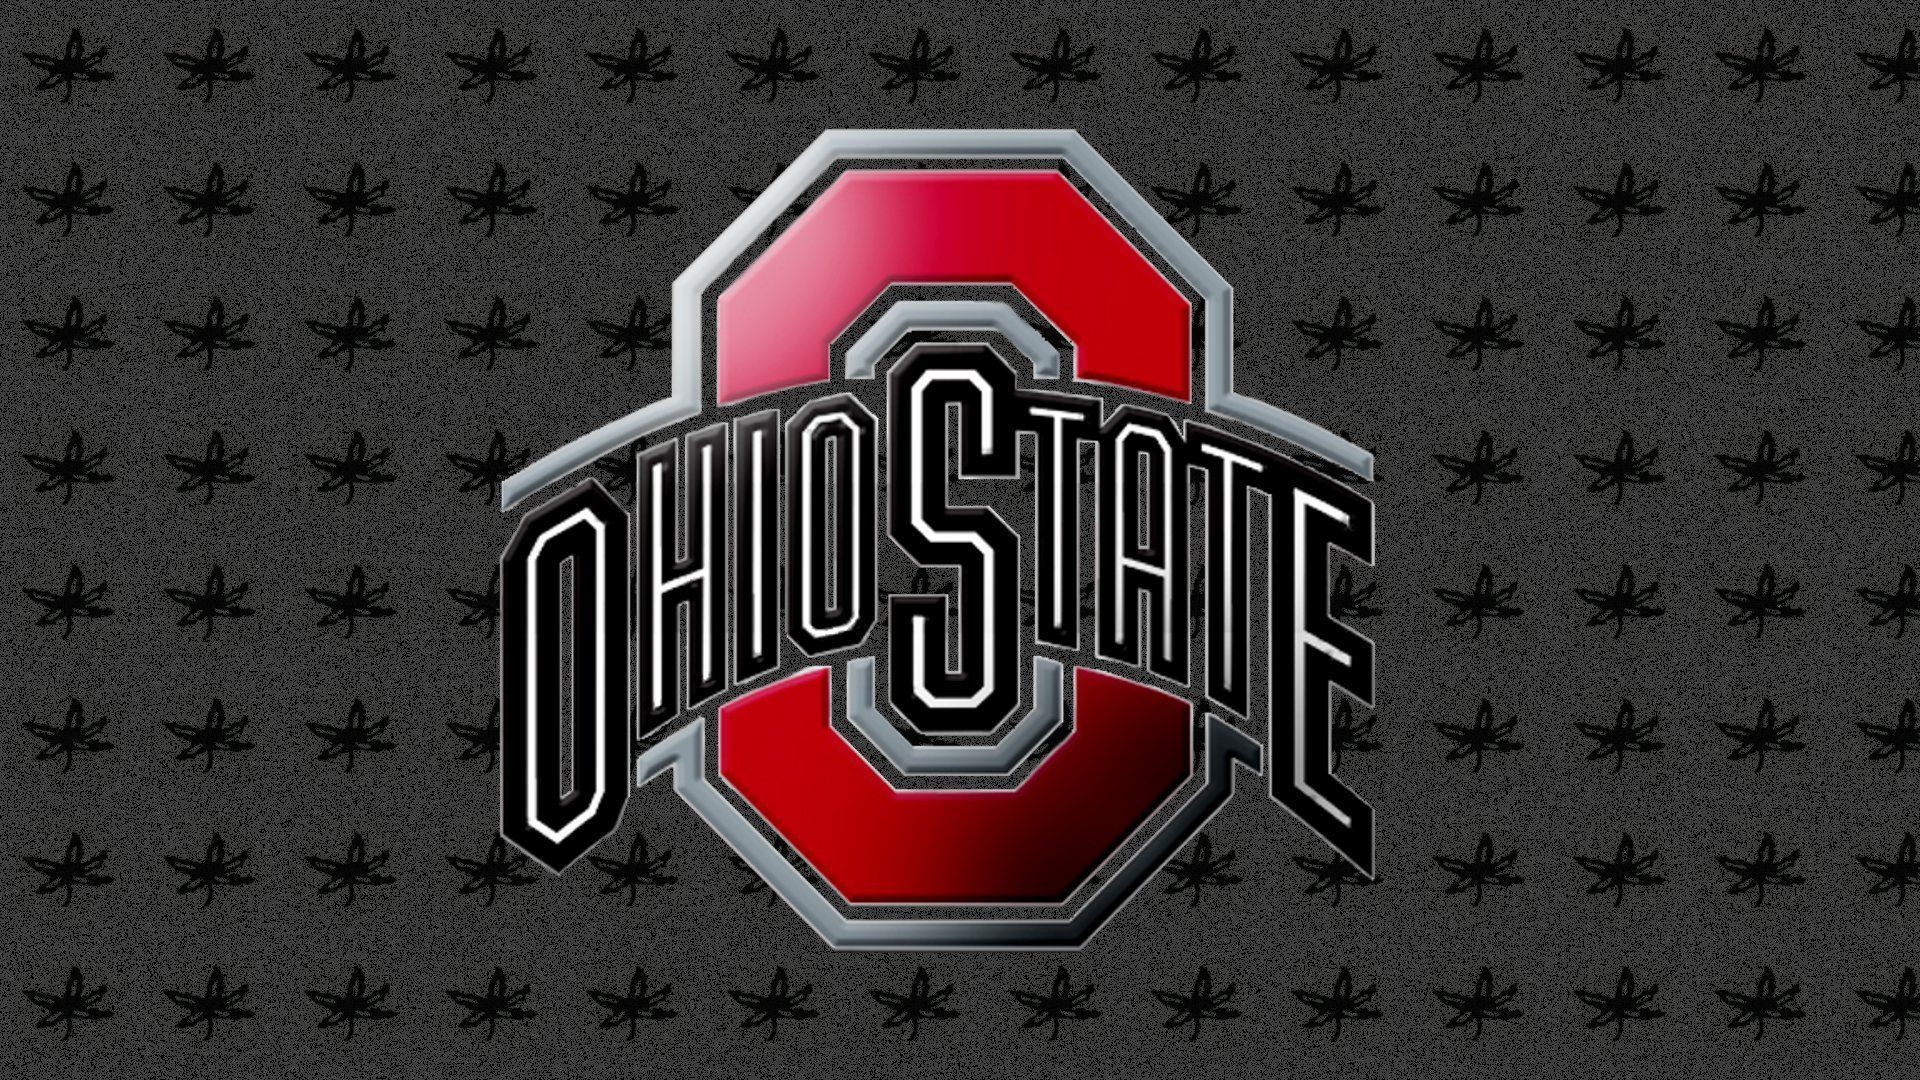 1920x1080 Ohio State Buckeyes Football Wallpapers - Wallpaper Cave